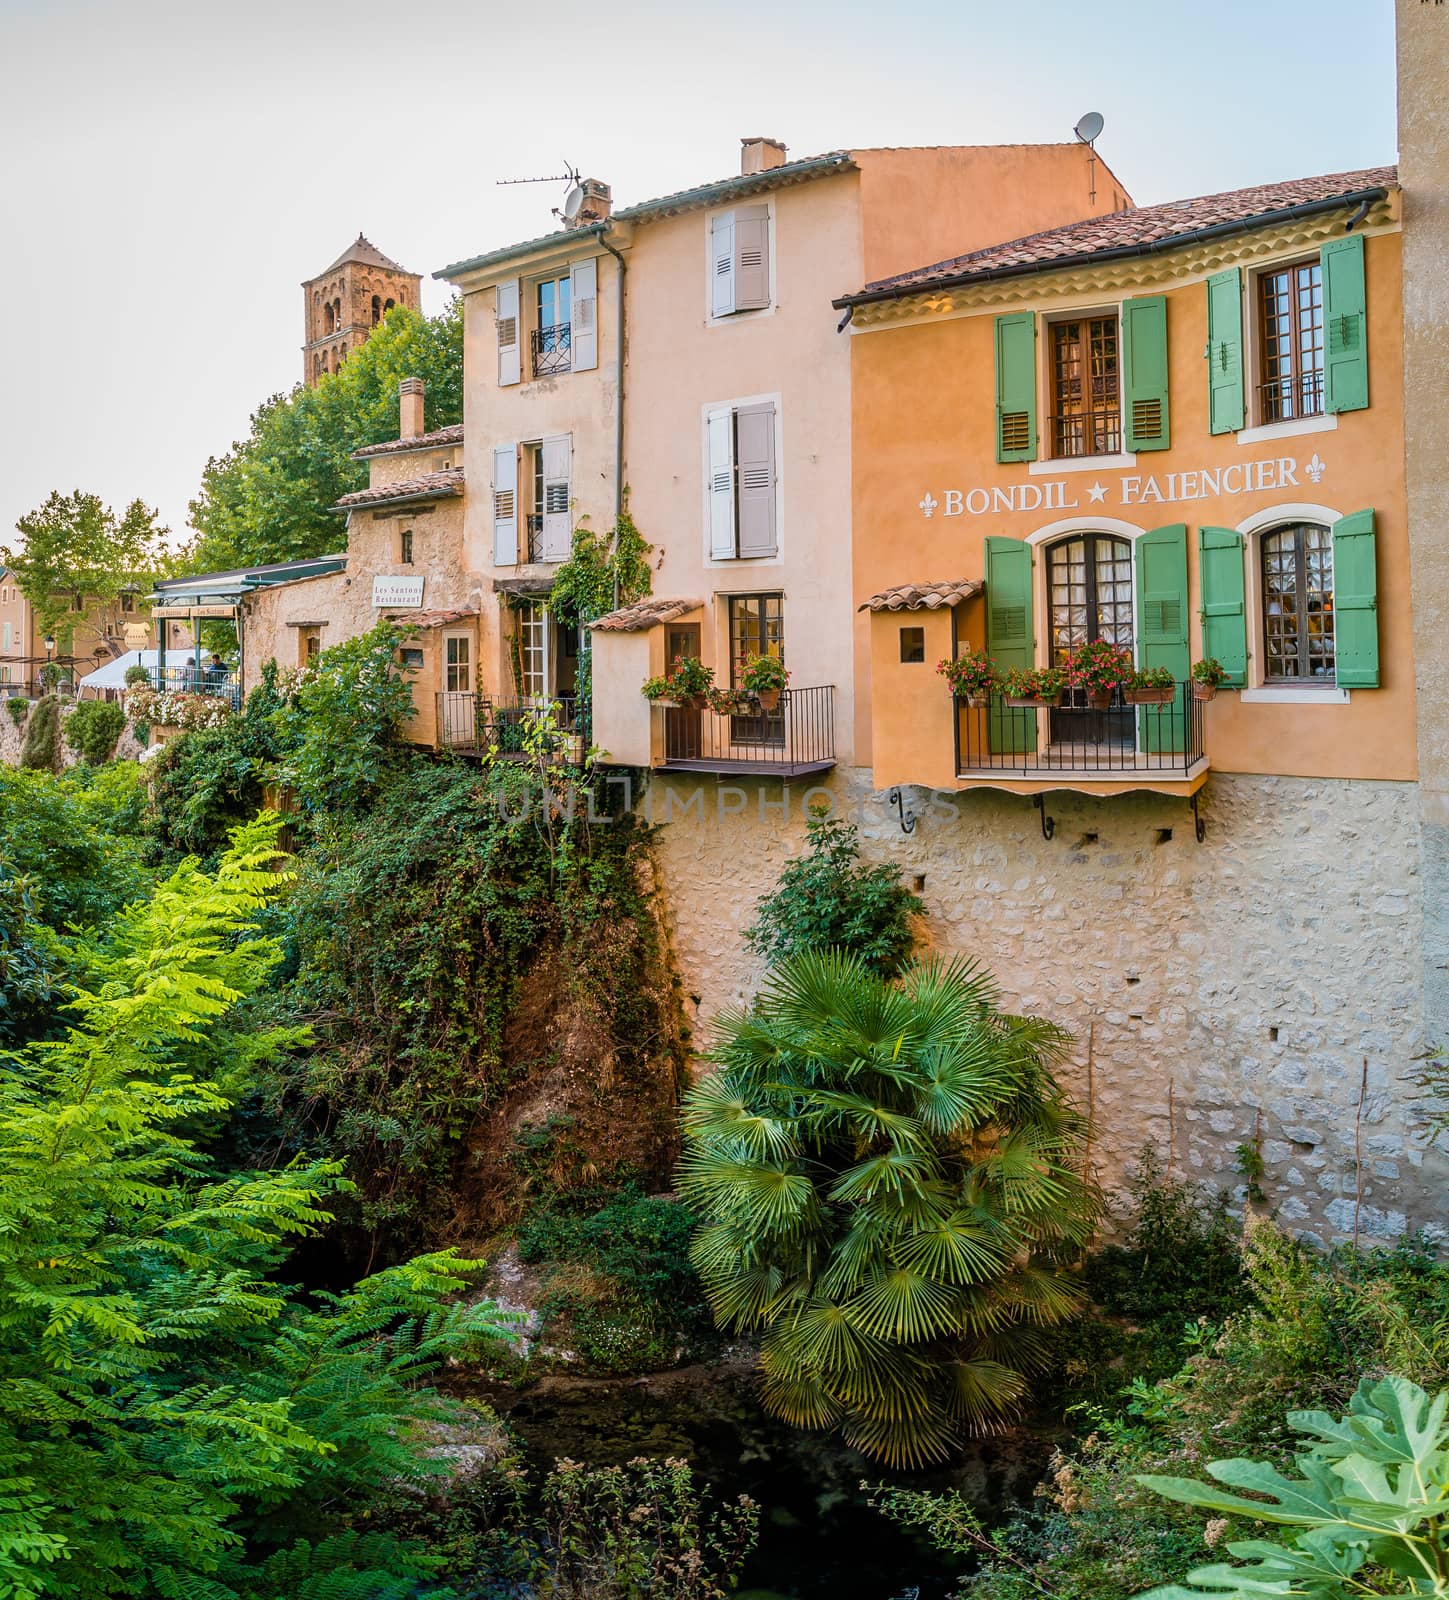 River and trees in the lovely village of Moustiers Sainte Marie in France